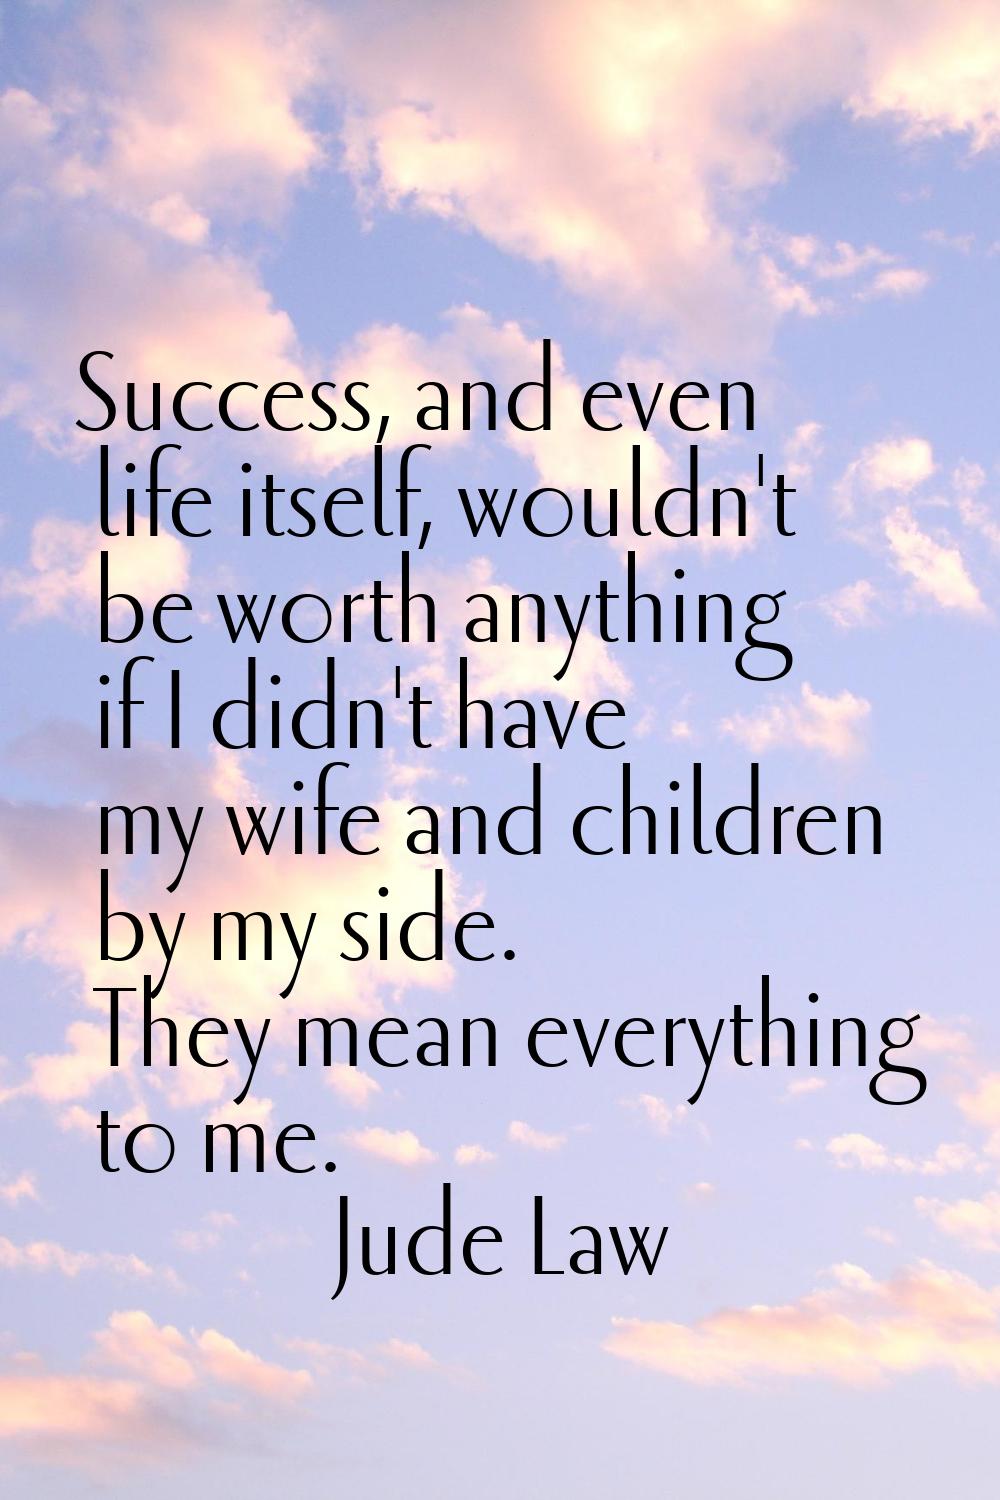 Success, and even life itself, wouldn't be worth anything if I didn't have my wife and children by 